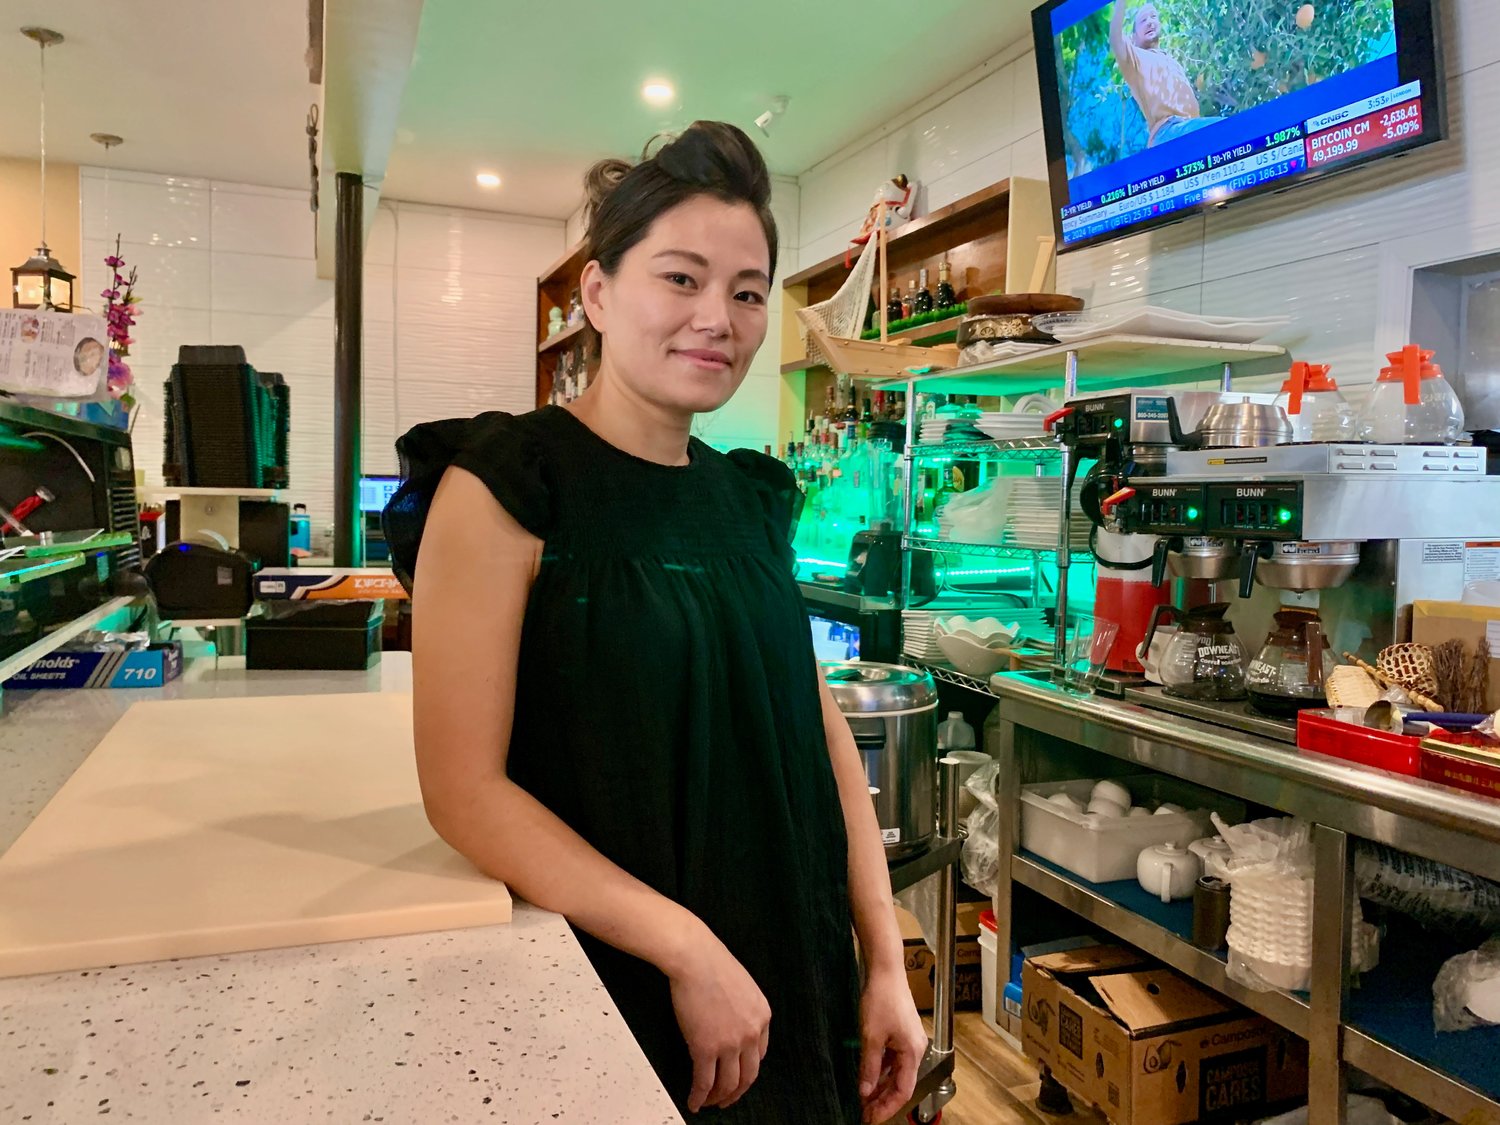 Mindy Zhang, owner of Mindy’s Restaurant and Sushi Bar, hopes to also offer breakfast at her place soon.